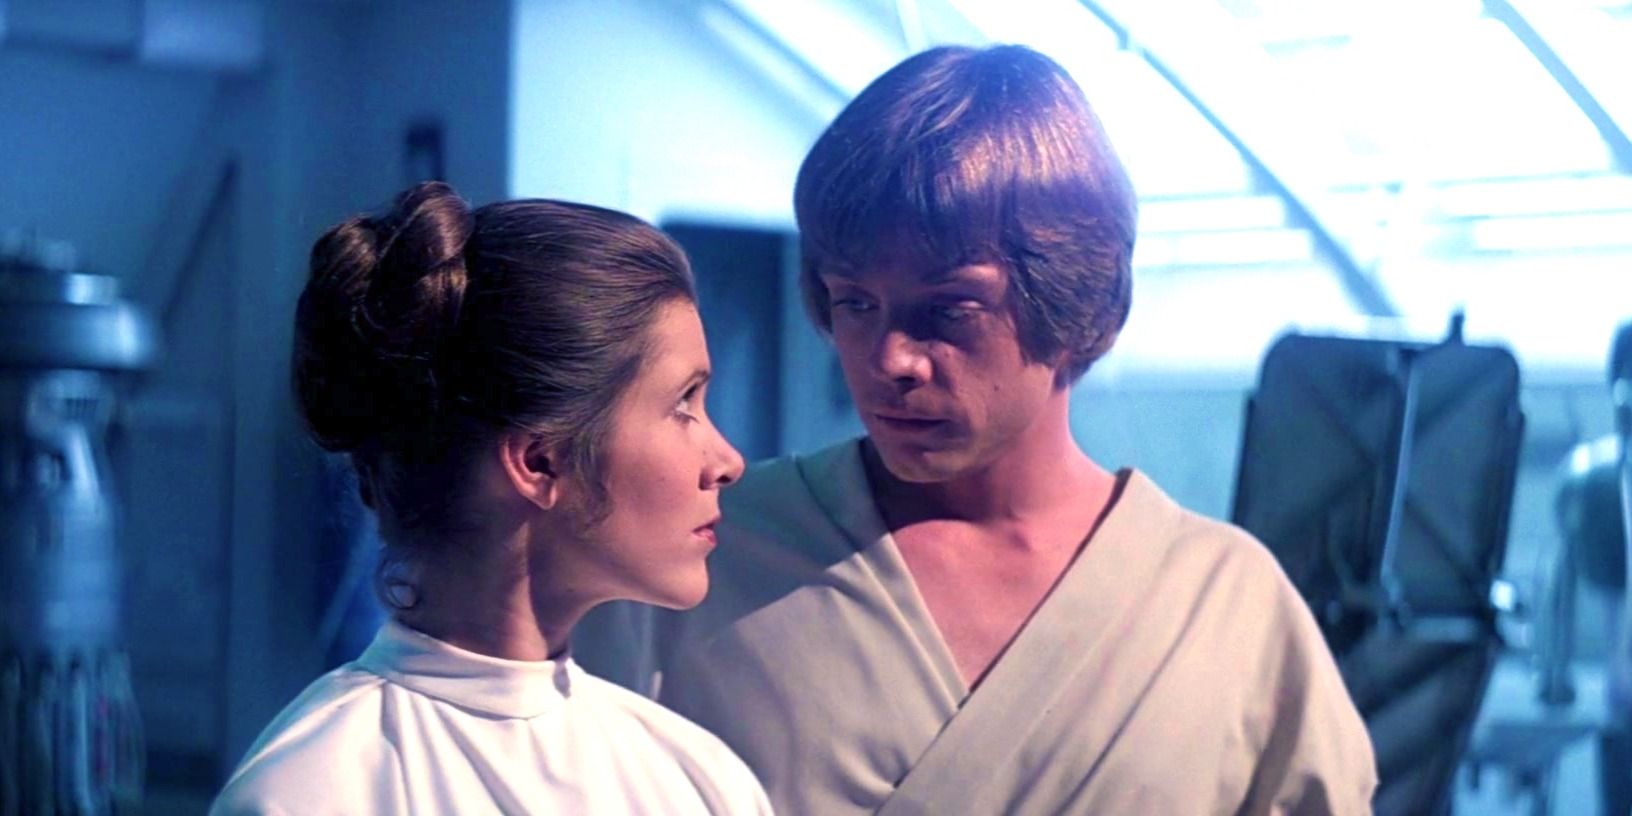 Luke Skywalker and Princess Leia looking at one another in The Empire Strikes Back